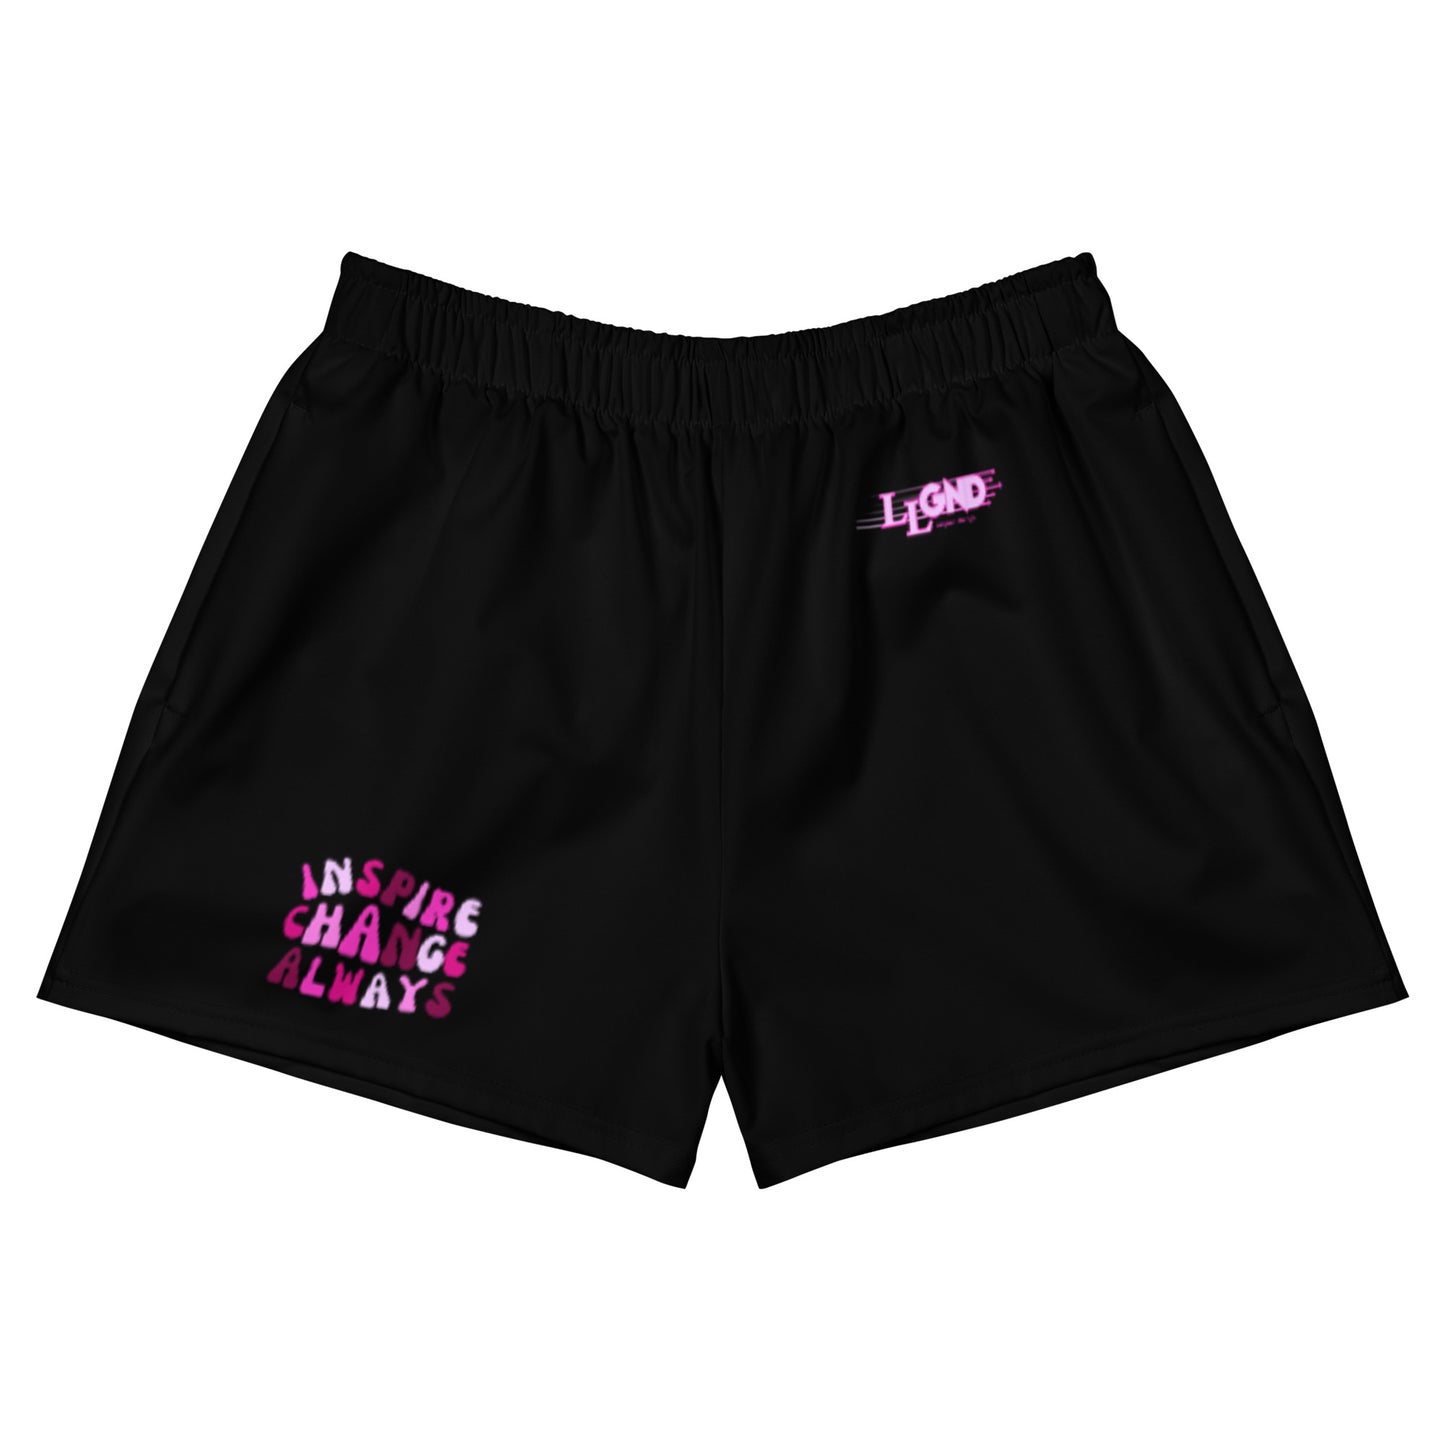 WOMEN'S INSPIRE RECYCLED SHORTS (ROSE)